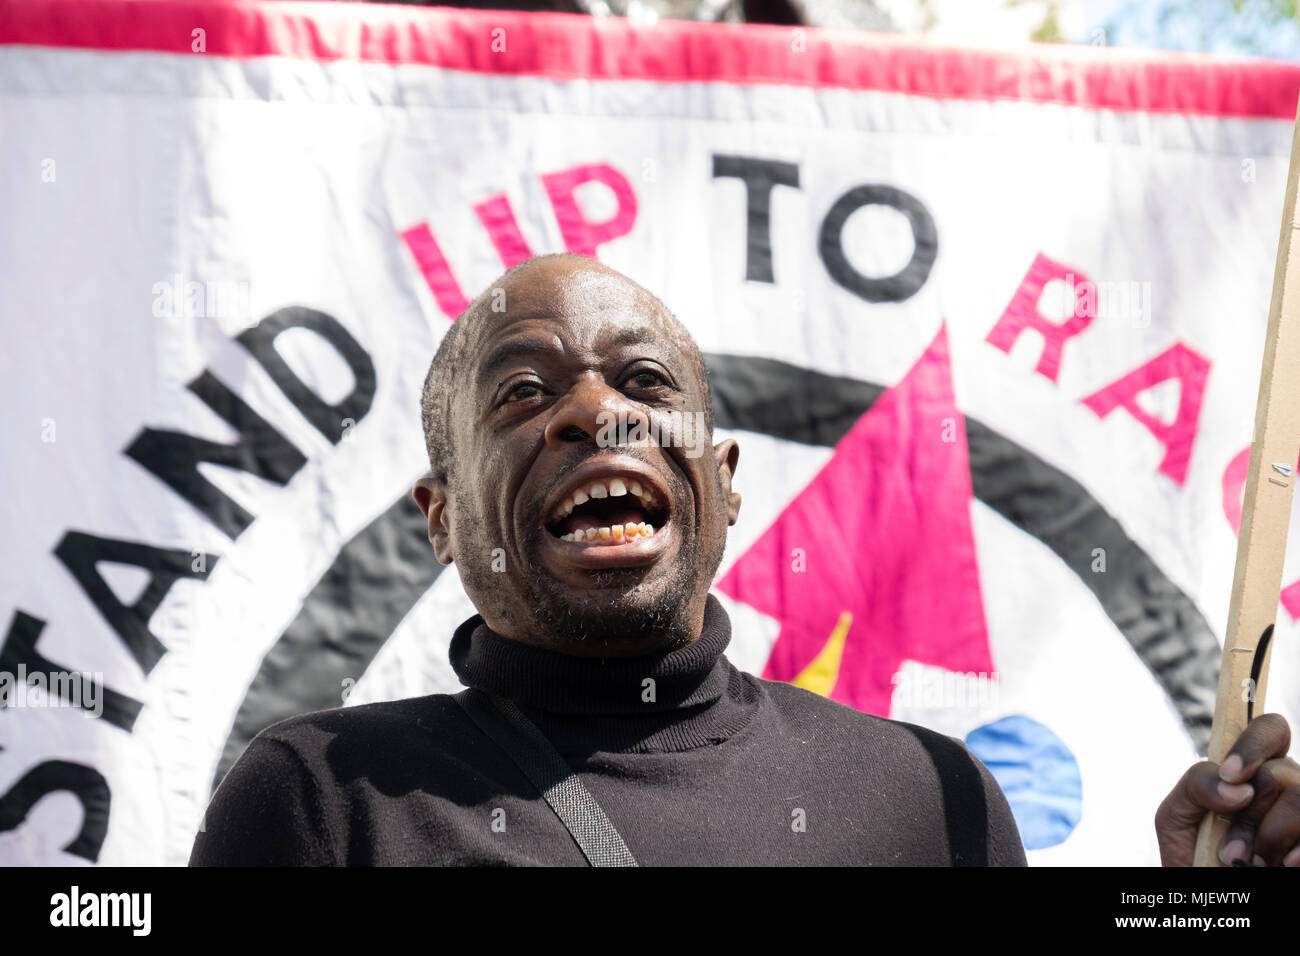 London, UK, 5th May 2018, Demonstrators attend a march for Windrush opposite Downing Street in an attempt to overturn the governments immigration policy stating Theresa May's current policy is racist. Weyman Bennett of the stand up to racism organisation gives a speech to the attendees Credit: adrian looby/Alamy Live News Stock Photo